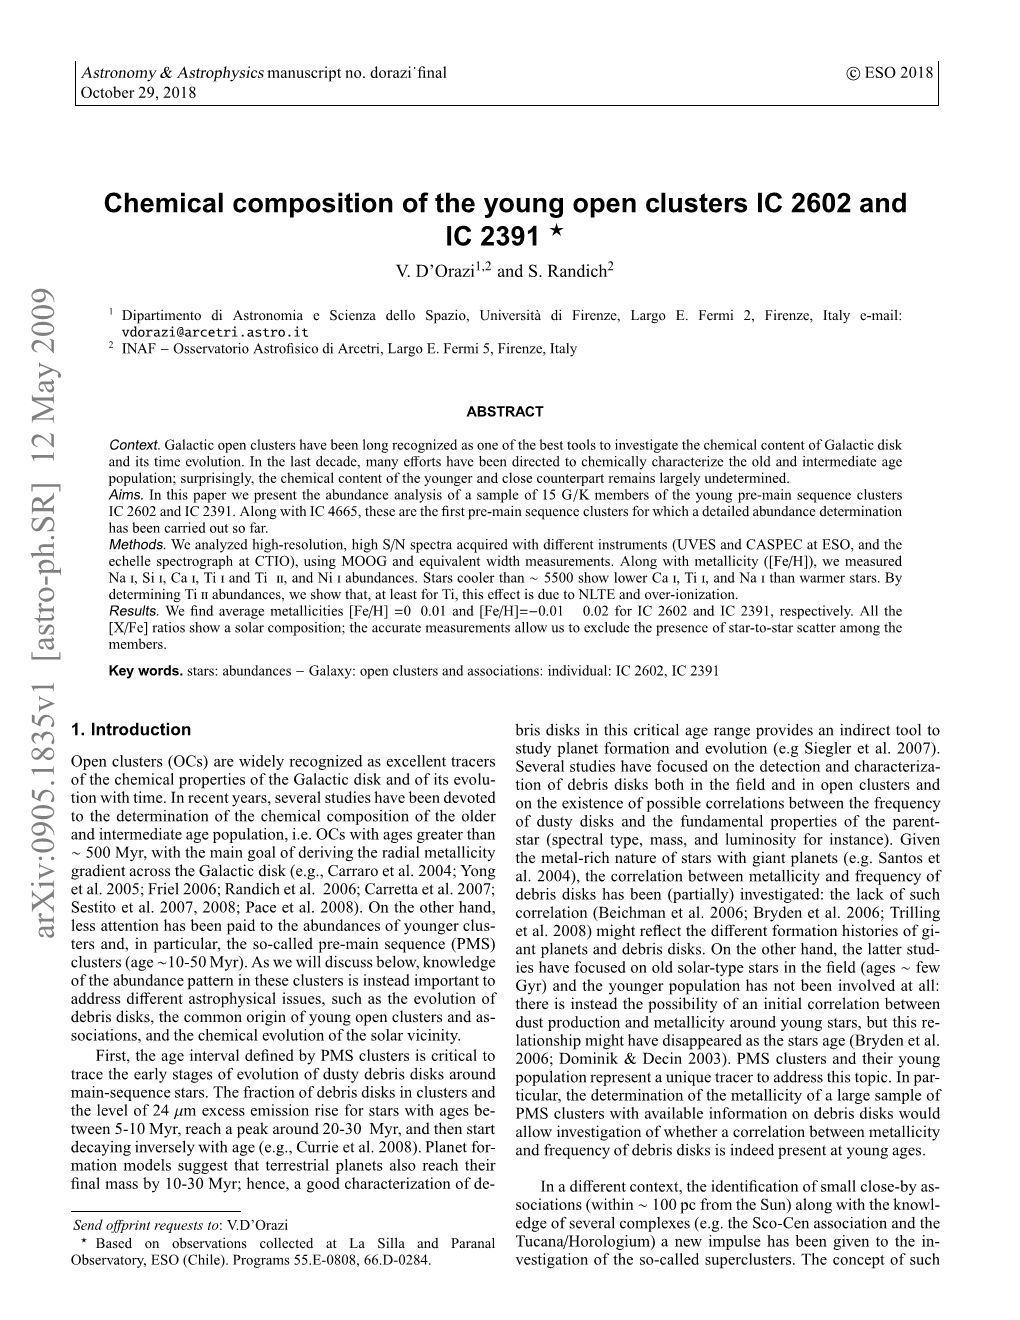 Chemical Composition of the Young Open Clusters IC 2602 and IC 2391